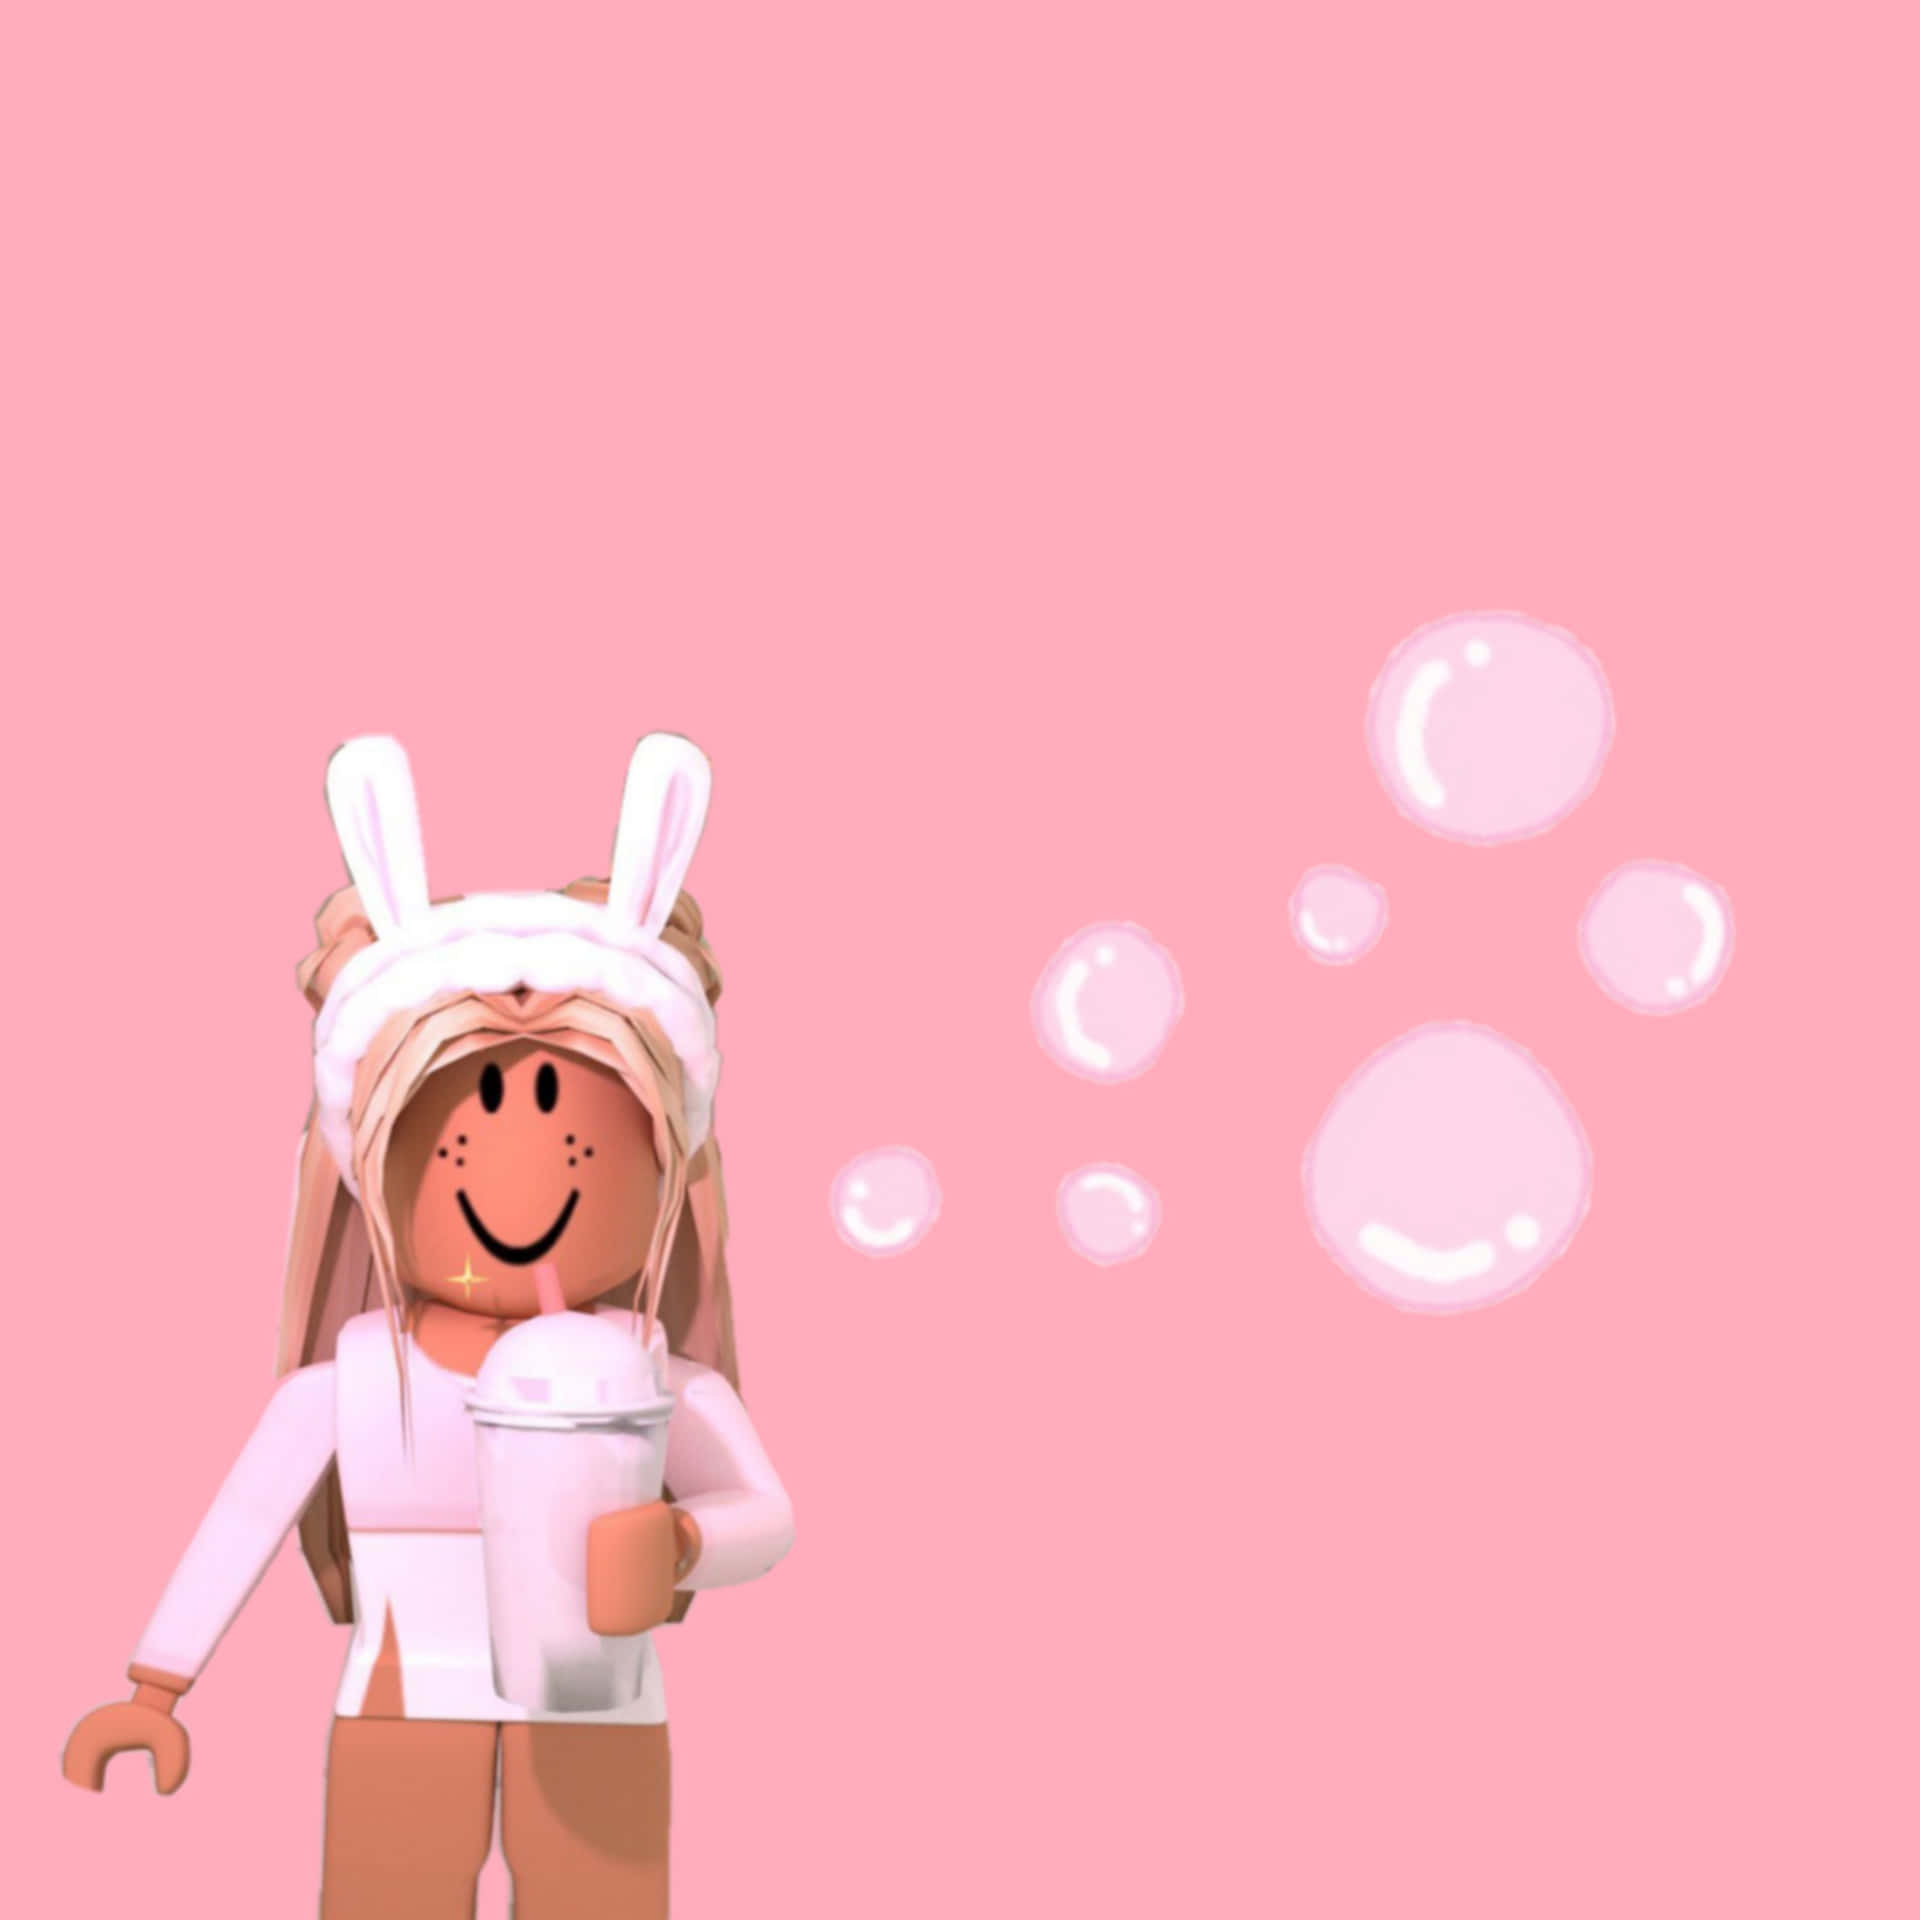 Bunny Eared Character With Bubbles Wallpaper